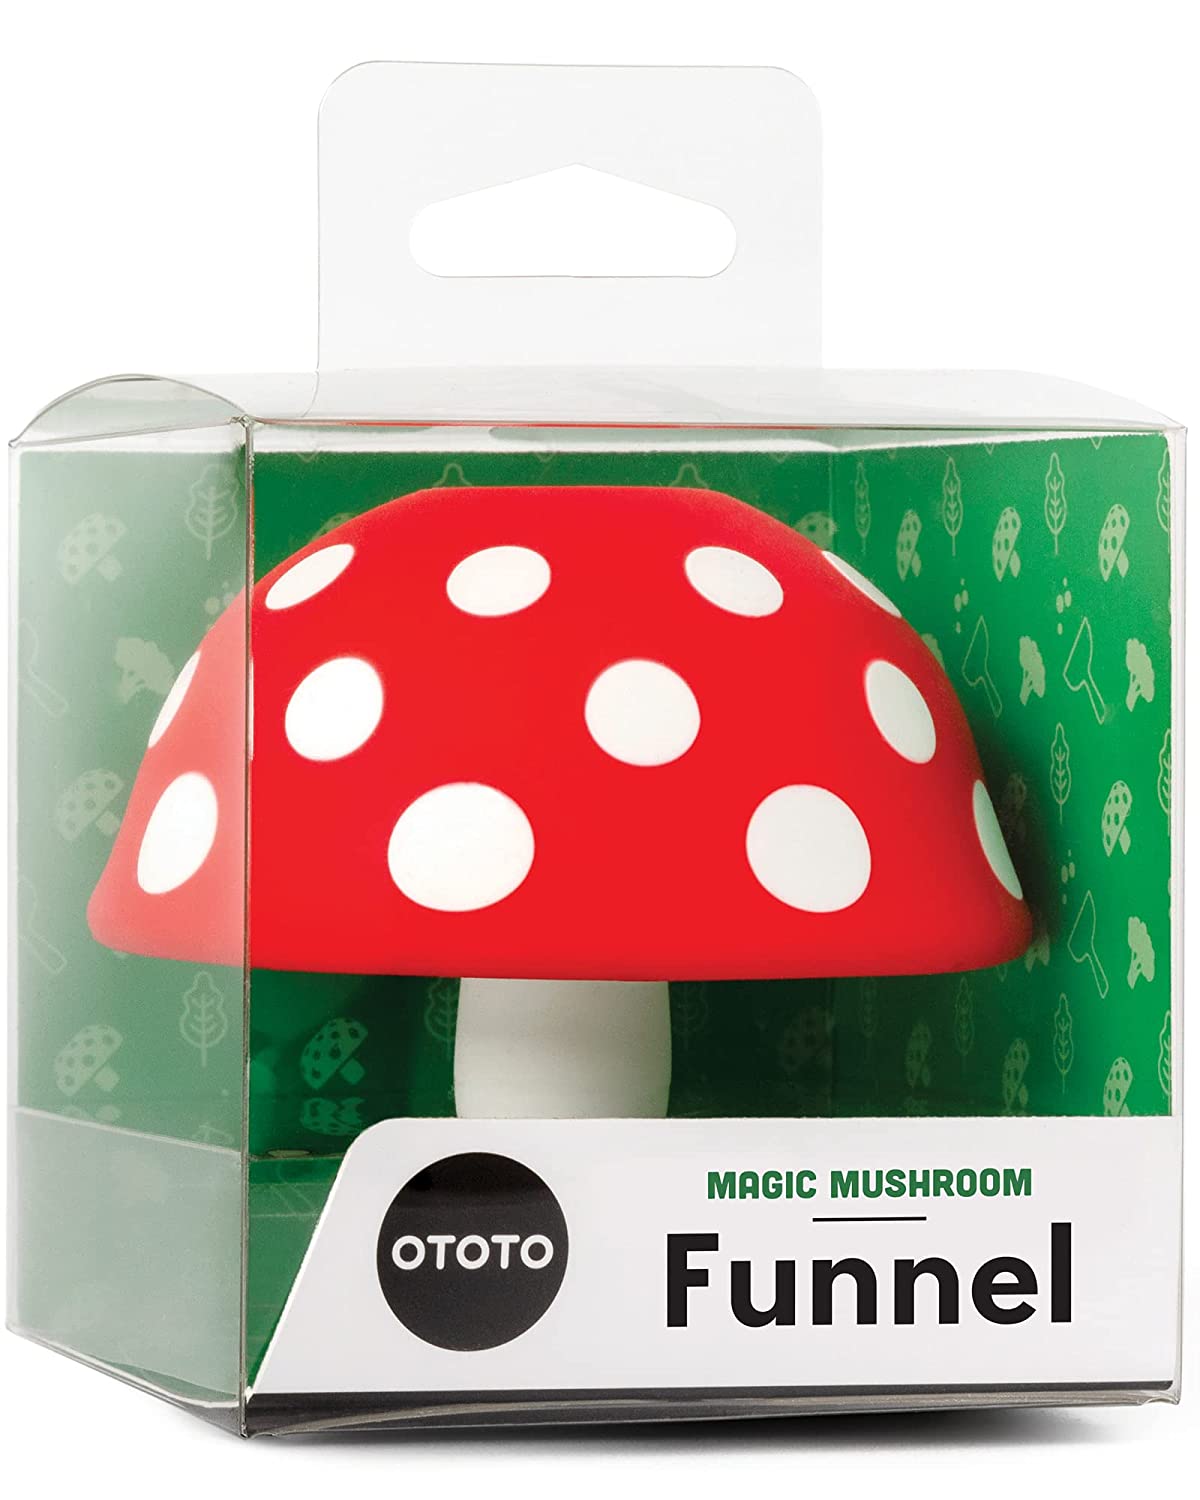 OTOTO Collapsible Mushroom Shaped Silicone Funnel